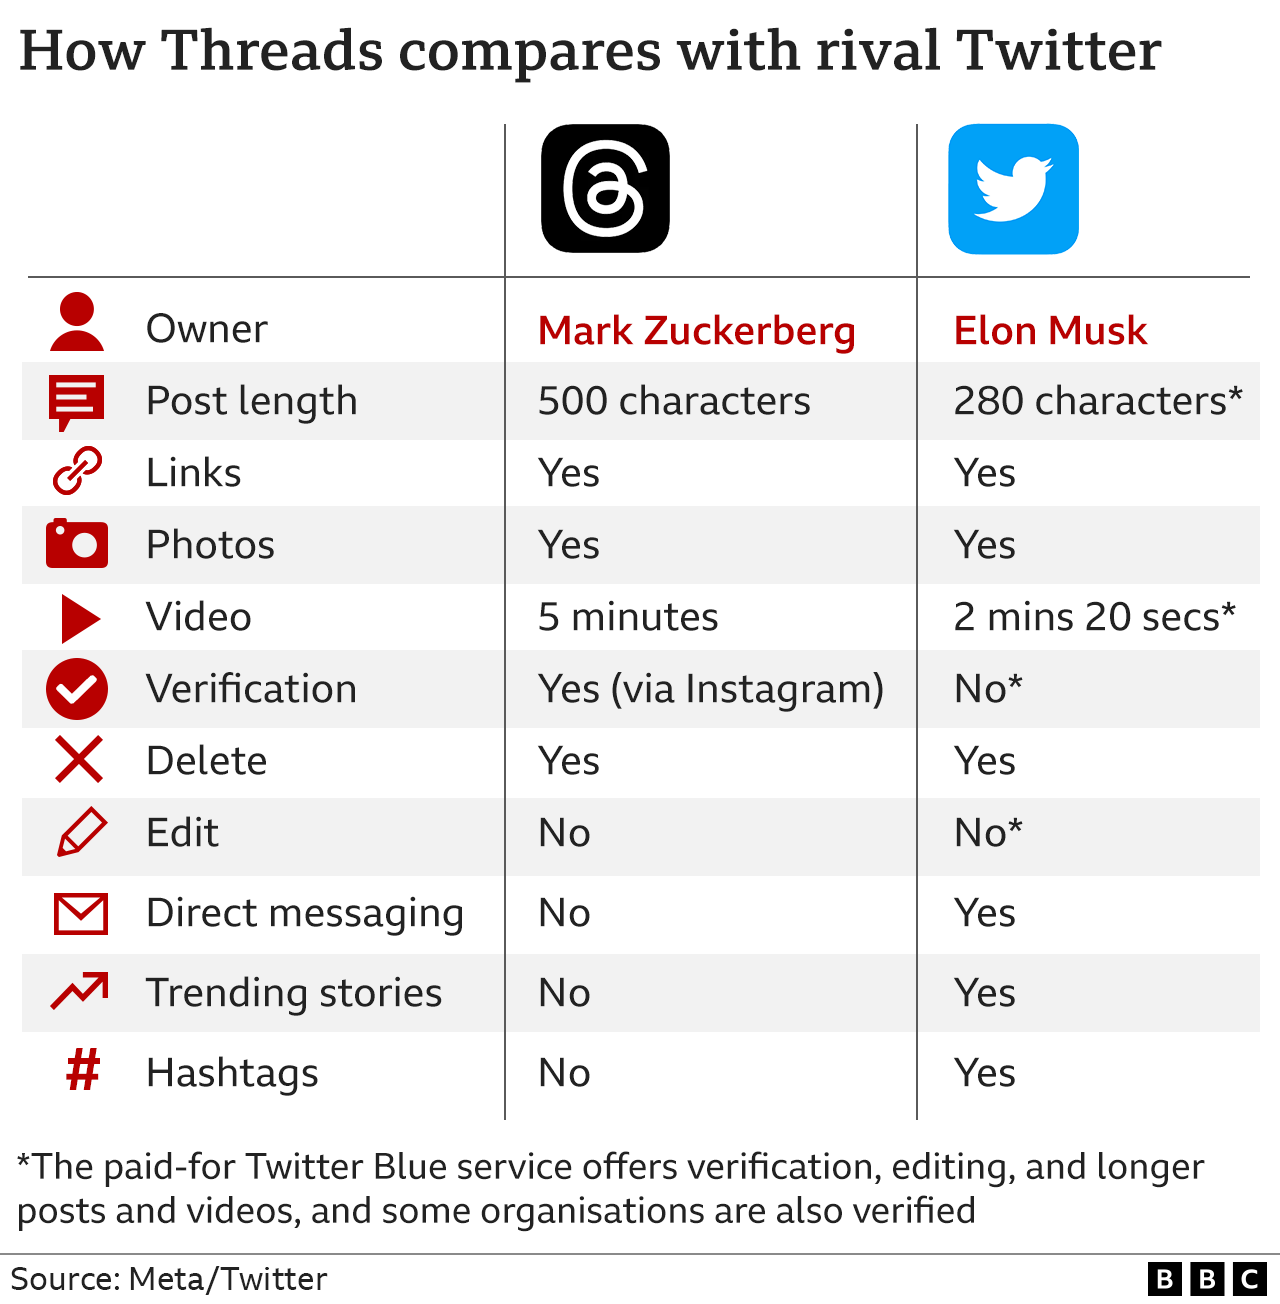 Table showing how Threads and Twitter compare, with Threads allowing posts of 500 characters compared with Twitter's 280, and 5 minute videos compared with 2min 20 secs. Both allow links, photos, and deleting posts but Twitter allows direct messaging, shows trending stories, and uses hashtags which Threads doesn't. Threads has verification but it is one of the services that you have to pay to access on Twitter, along with longer posts and videos and an editing function.